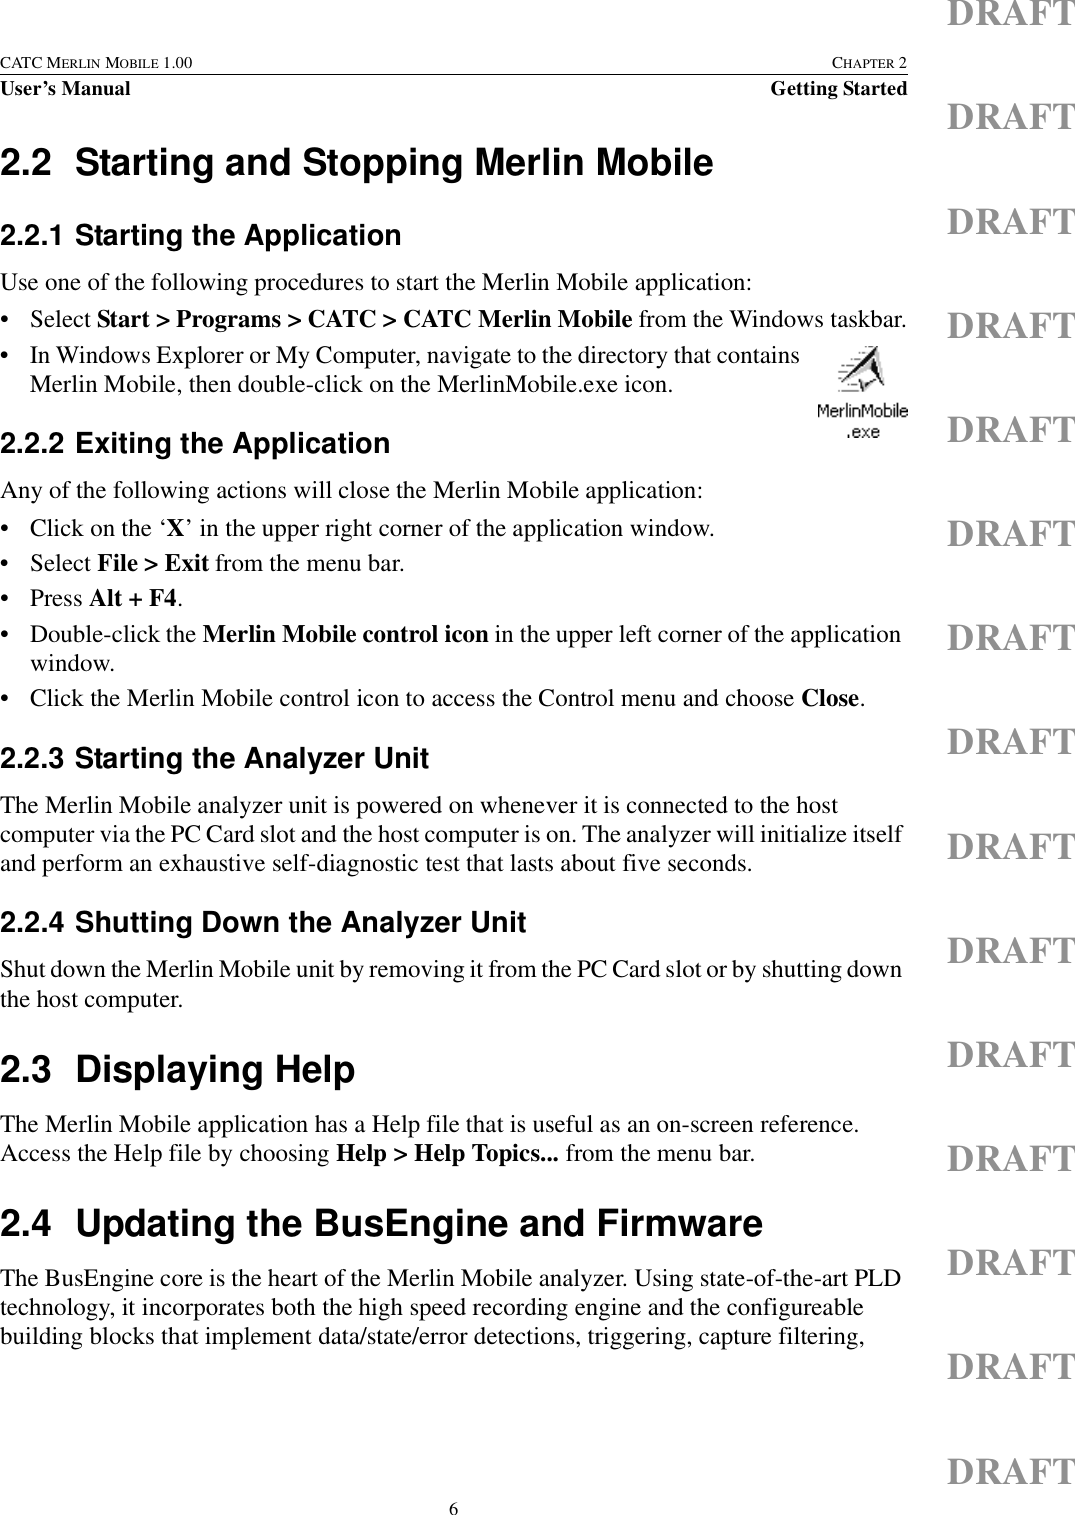 6CATC MERLIN MOBILE 1.00 CHAPTER 2User’s Manual Getting StartedDRAFTDRAFTDRAFTDRAFTDRAFTDRAFTDRAFTDRAFTDRAFTDRAFTDRAFTDRAFTDRAFTDRAFTDRAFT2.2 Starting and Stopping Merlin Mobile2.2.1 Starting the ApplicationUse one of the following procedures to start the Merlin Mobile application:• Select Start &gt; Programs &gt; CATC &gt; CATC Merlin Mobile from the Windows taskbar.• In Windows Explorer or My Computer, navigate to the directory that contains Merlin Mobile, then double-click on the MerlinMobile.exe icon.2.2.2 Exiting the ApplicationAny of the following actions will close the Merlin Mobile application:• Click on the ‘X’ in the upper right corner of the application window.• Select File &gt; Exit from the menu bar.•Press Alt + F4.• Double-click the Merlin Mobile control icon in the upper left corner of the application window.• Click the Merlin Mobile control icon to access the Control menu and choose Close.2.2.3 Starting the Analyzer UnitThe Merlin Mobile analyzer unit is powered on whenever it is connected to the host computer via the PC Card slot and the host computer is on. The analyzer will initialize itself and perform an exhaustive self-diagnostic test that lasts about five seconds.2.2.4 Shutting Down the Analyzer UnitShut down the Merlin Mobile unit by removing it from the PC Card slot or by shutting down the host computer.2.3 Displaying HelpThe Merlin Mobile application has a Help file that is useful as an on-screen reference. Access the Help file by choosing Help &gt; Help Topics... from the menu bar.2.4 Updating the BusEngine and FirmwareThe BusEngine core is the heart of the Merlin Mobile analyzer. Using state-of-the-art PLD technology, it incorporates both the high speed recording engine and the configureable building blocks that implement data/state/error detections, triggering, capture filtering, 